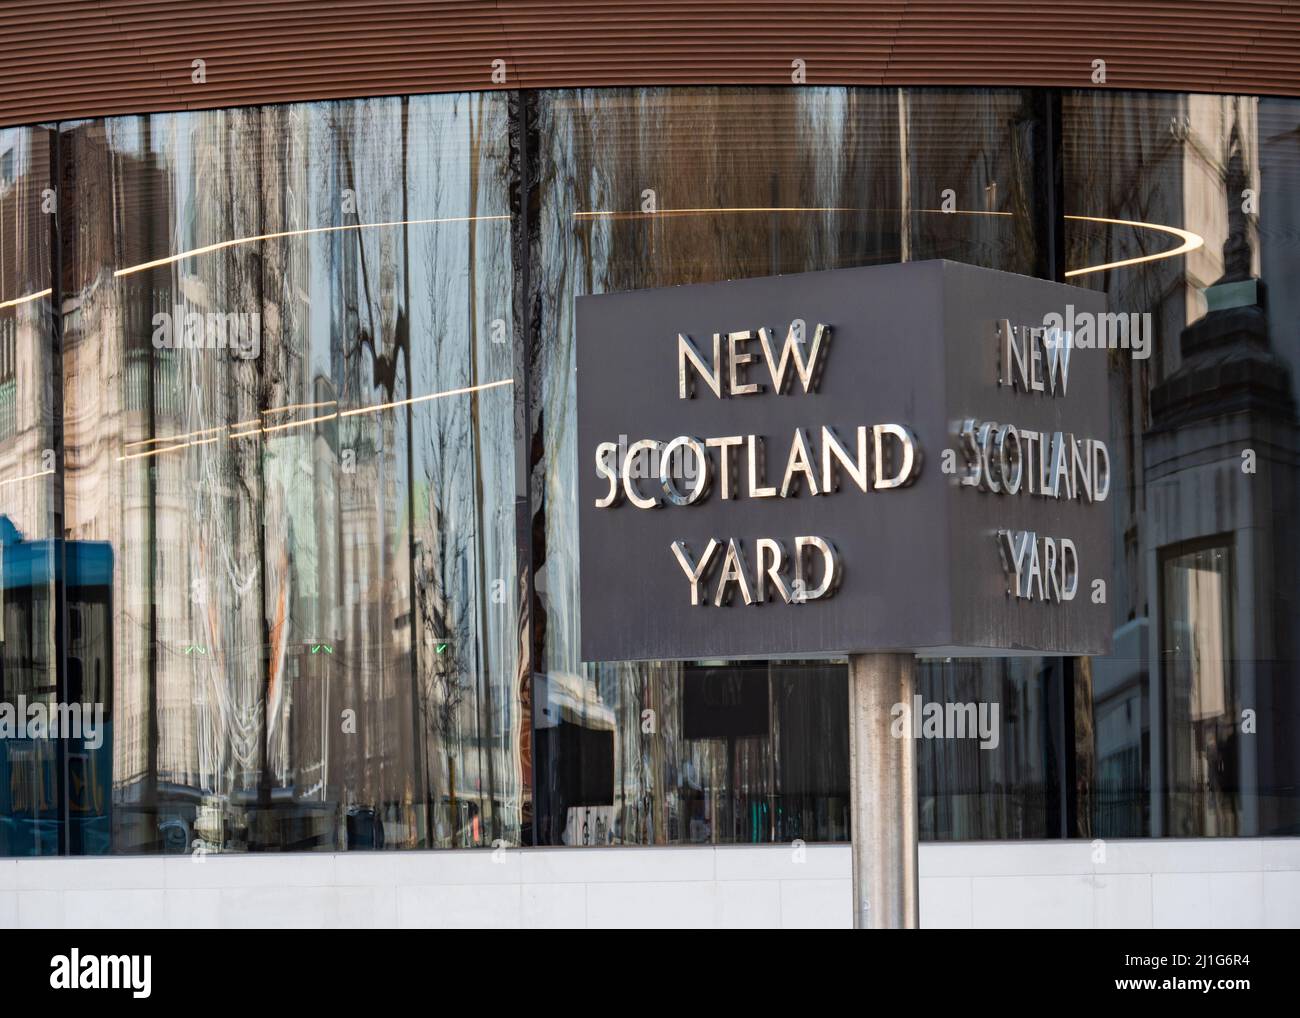 New Scotland Yard HQ, London. The iconic rotating sign outside the headquarters for the London Metropolitan Police on Victoria Embankment. Stock Photo